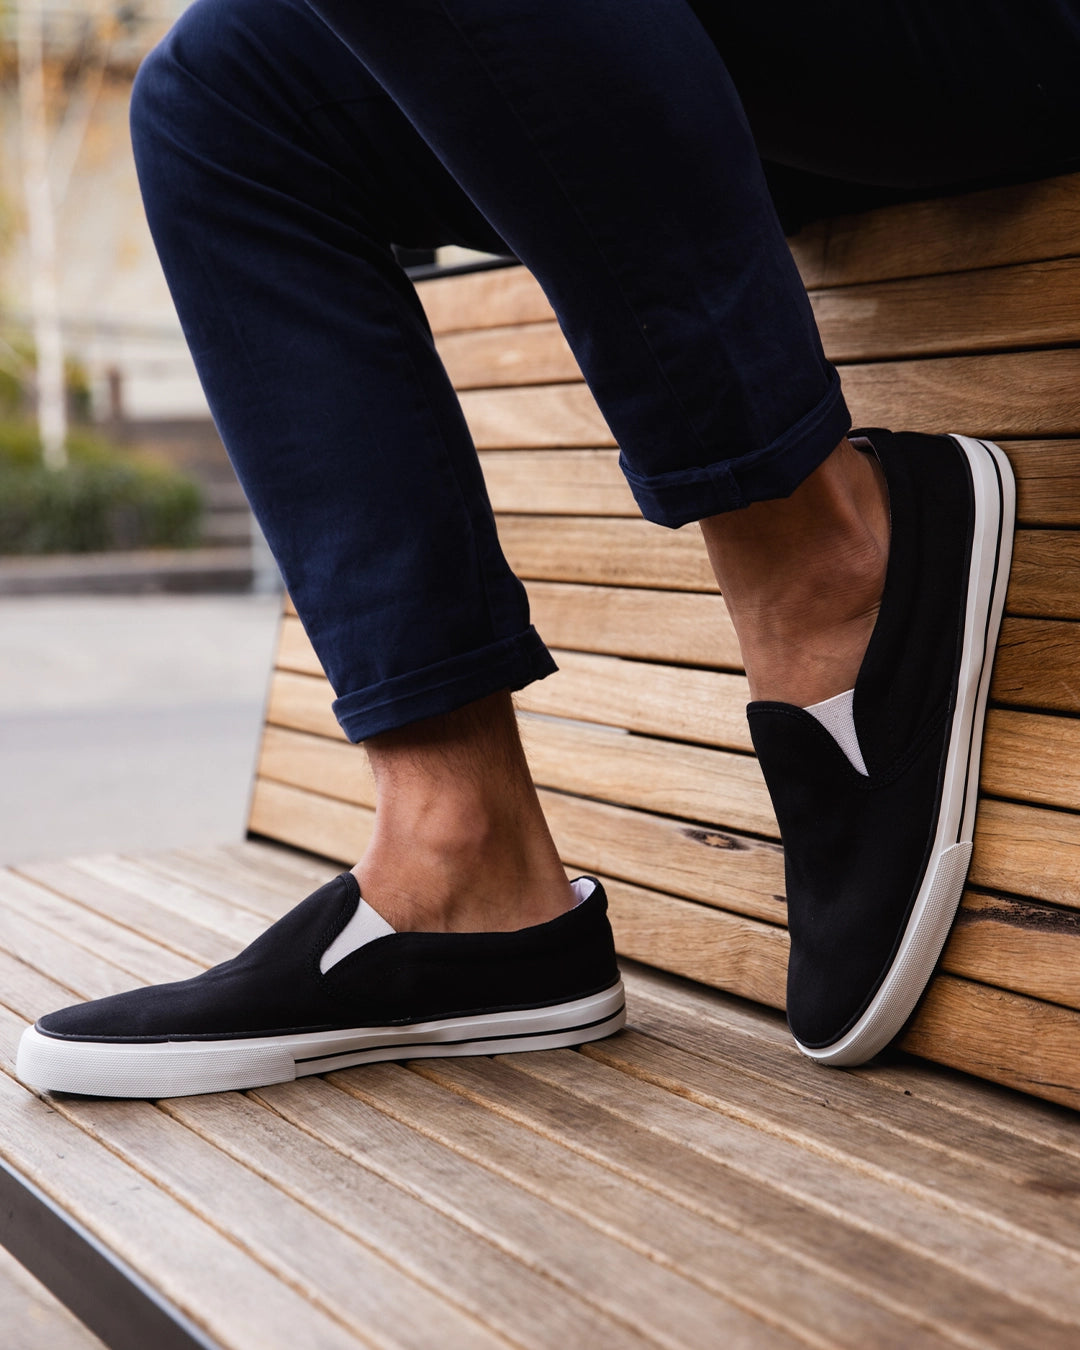 Etiko Vegan Slip Ons Black and White Sneakers Organic and Fairtrade Certified Ethical Sneakers